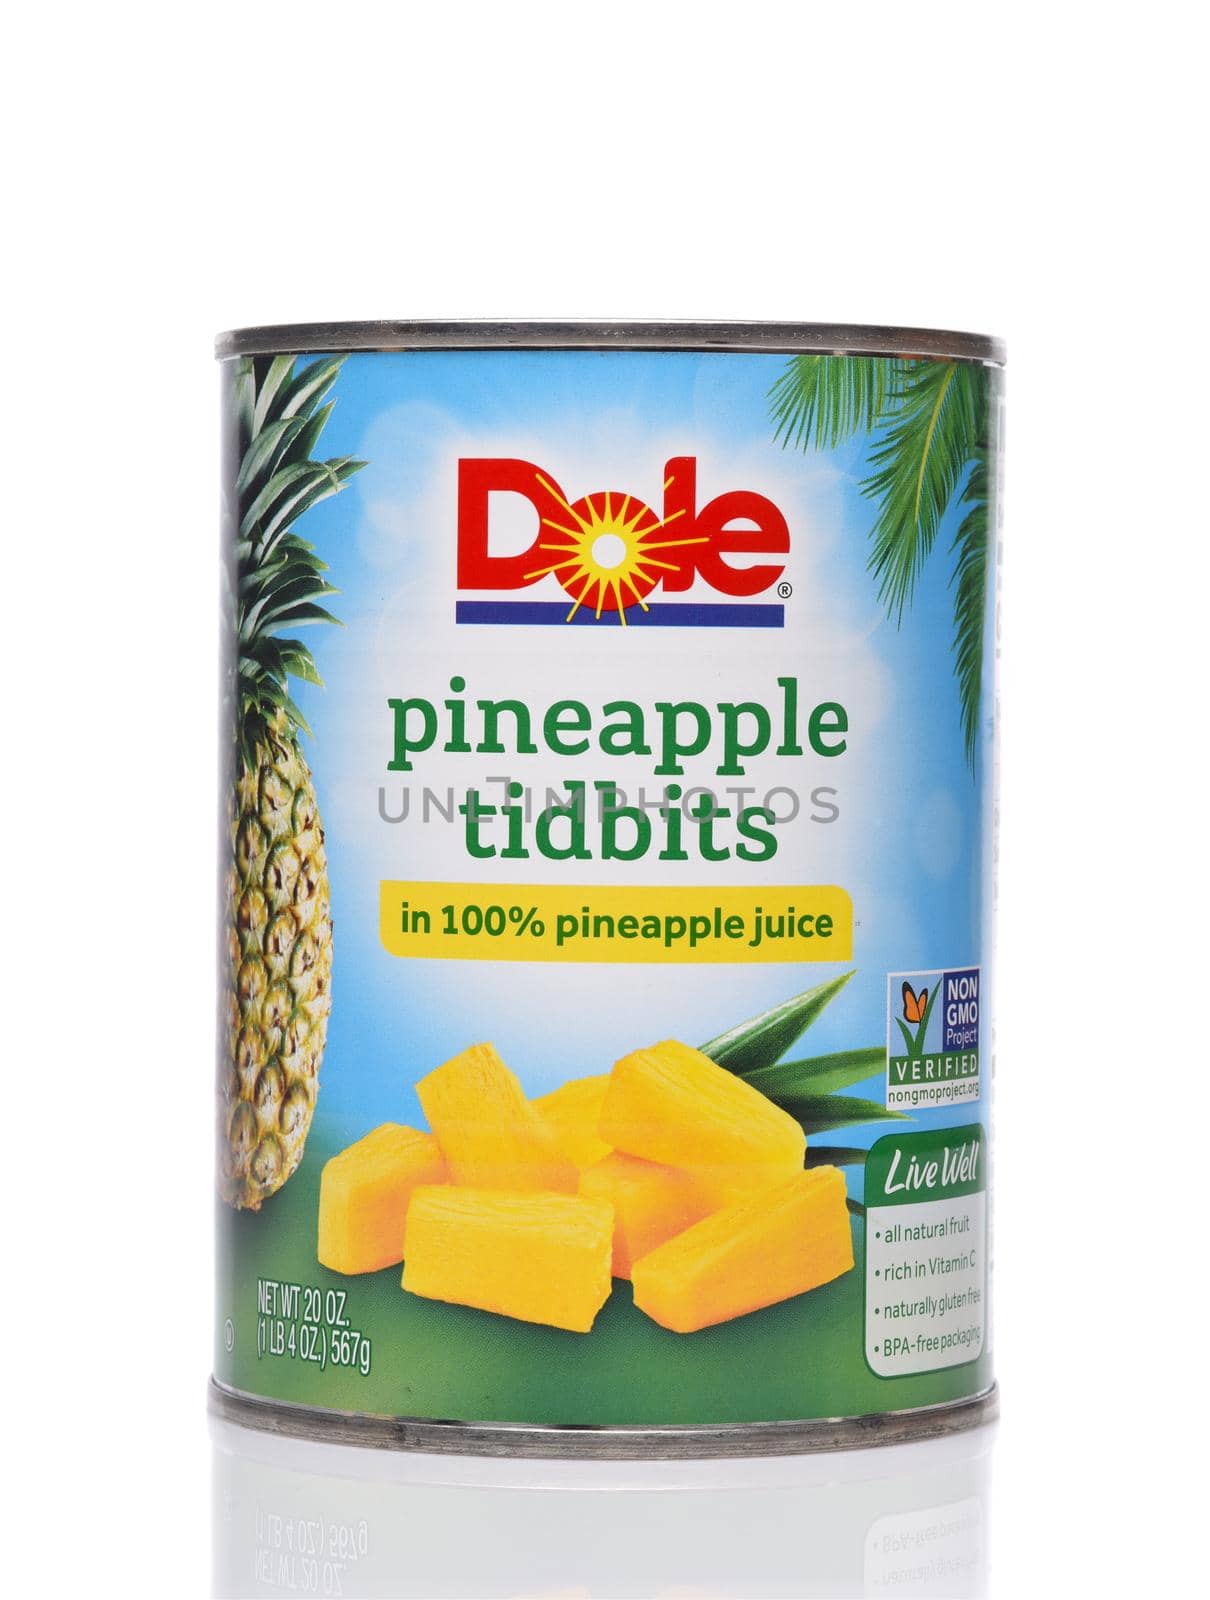 IRVINE, CALIFORNIA - 24 DECEMBER 2019: A can of Dole Pineapple Tidbits in pineapple juice.